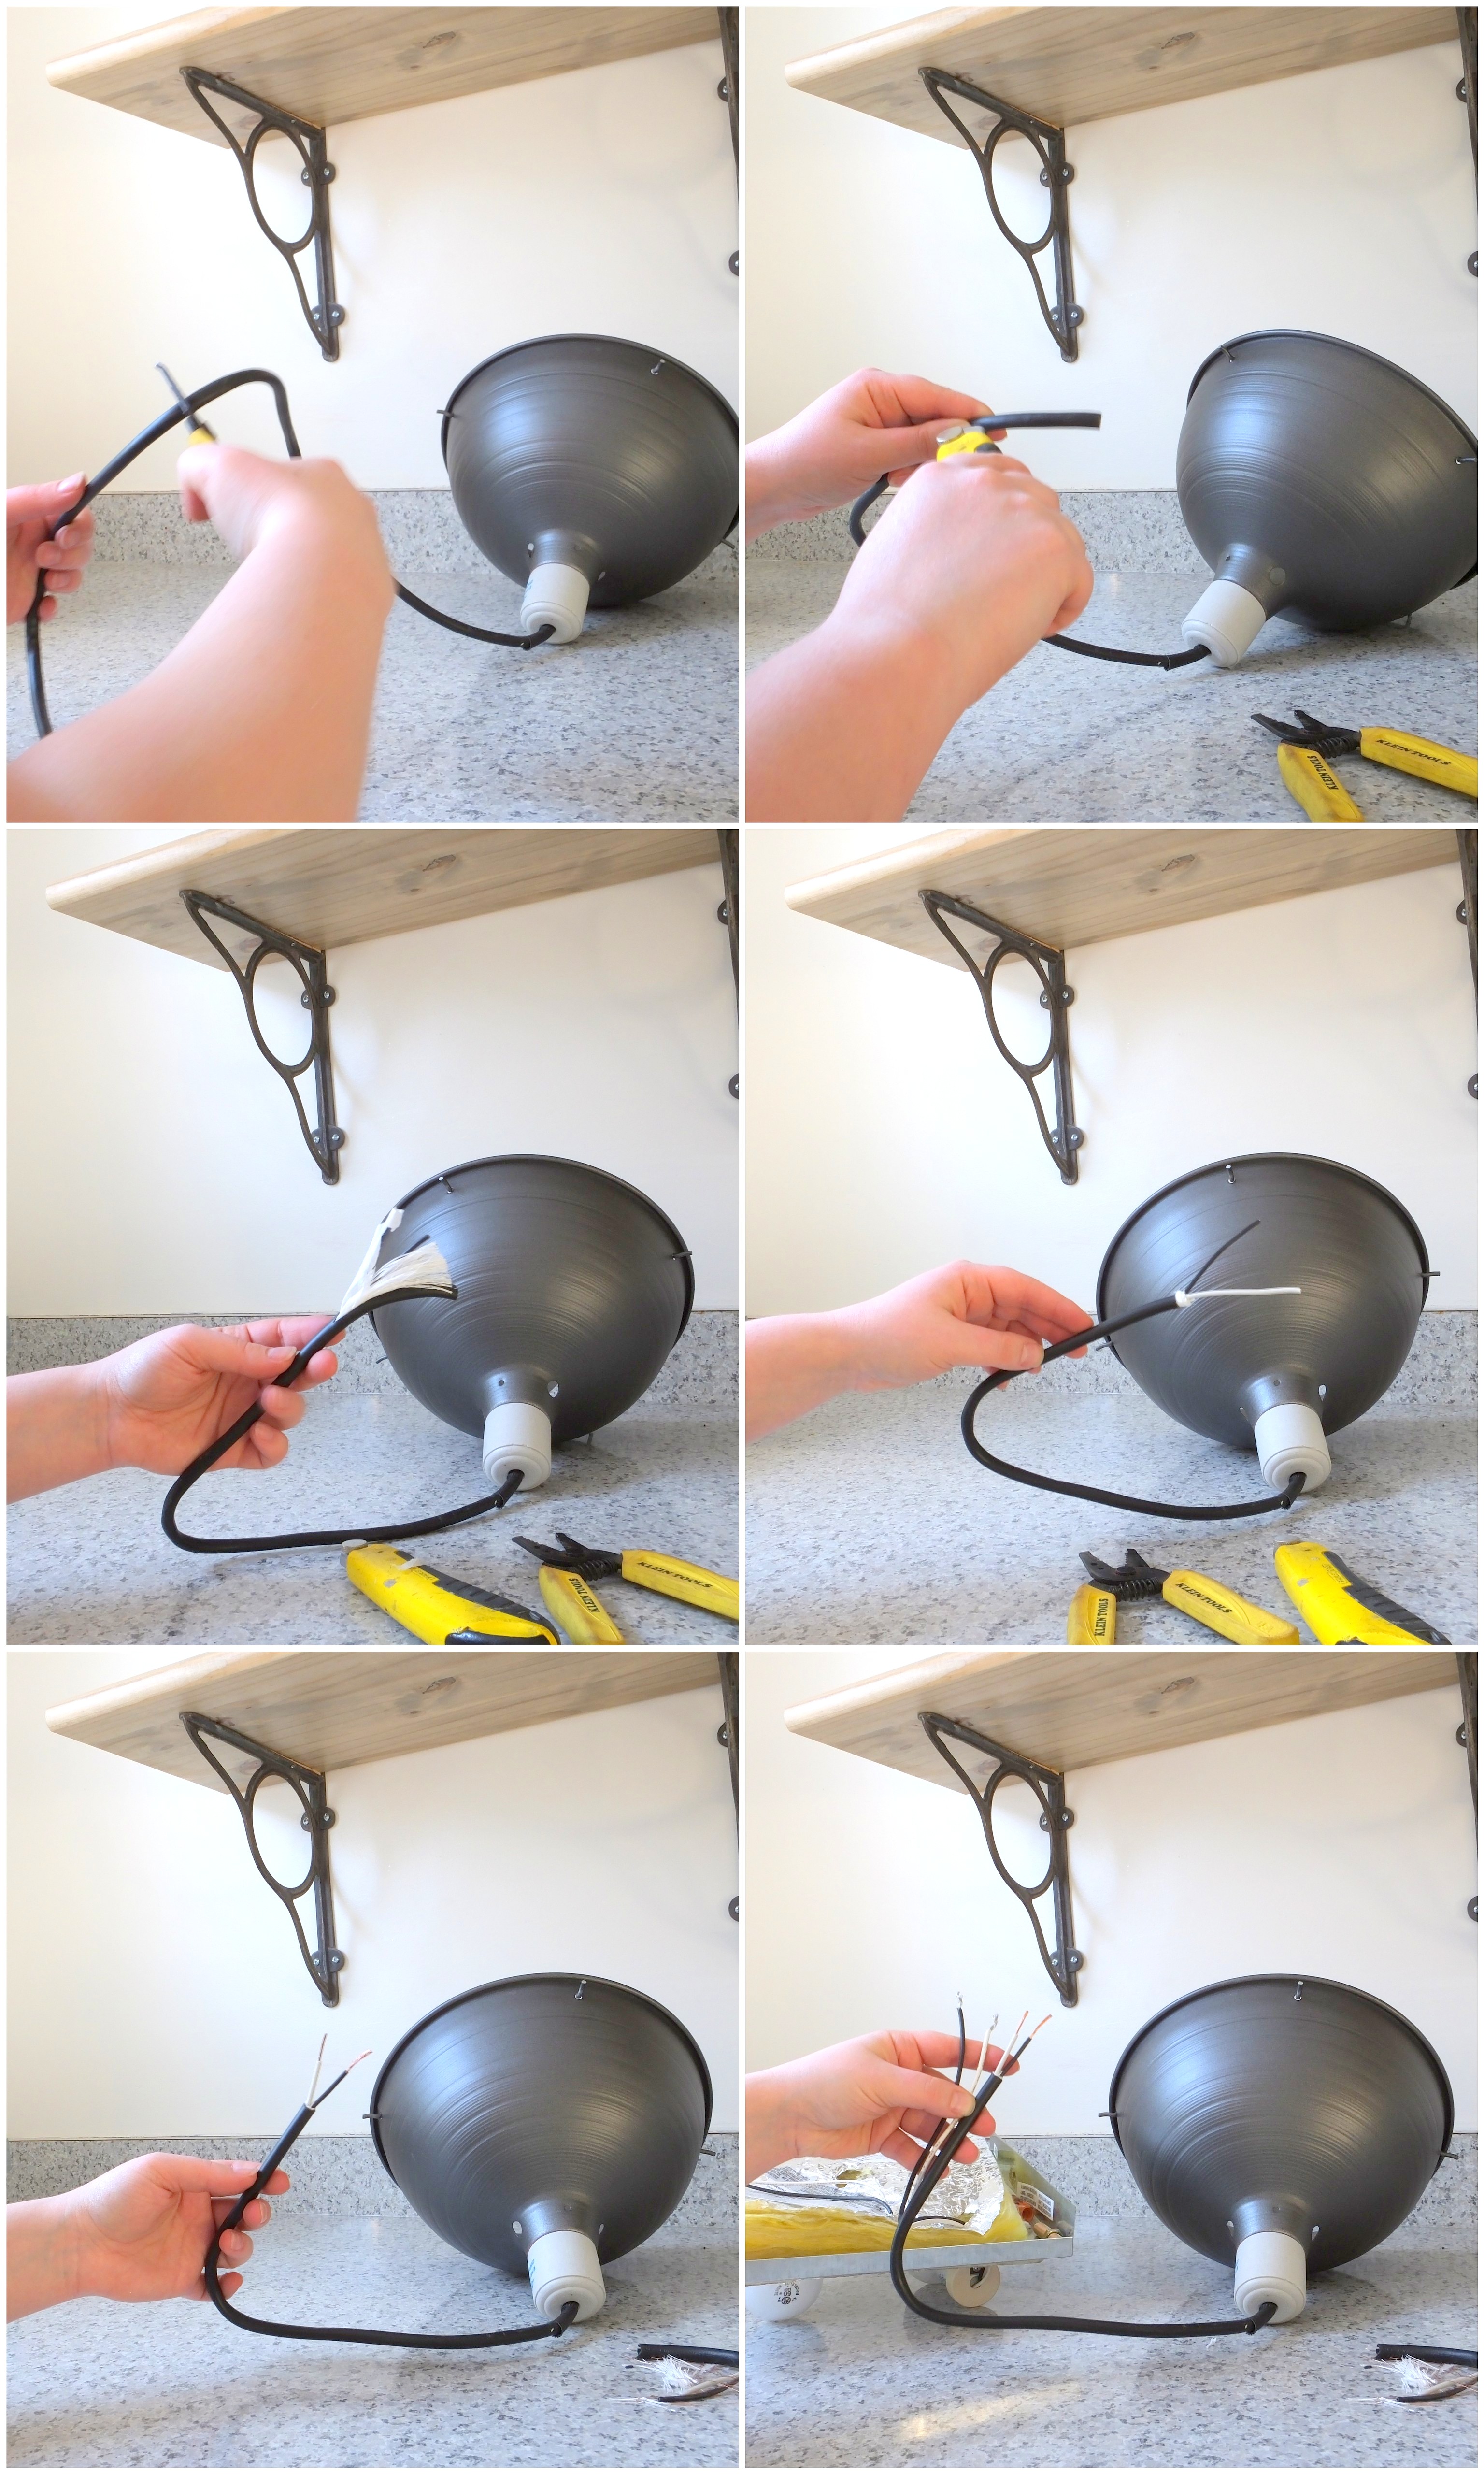 A Plug In Light Into Ceiling, How To Cut Chandelier Wire